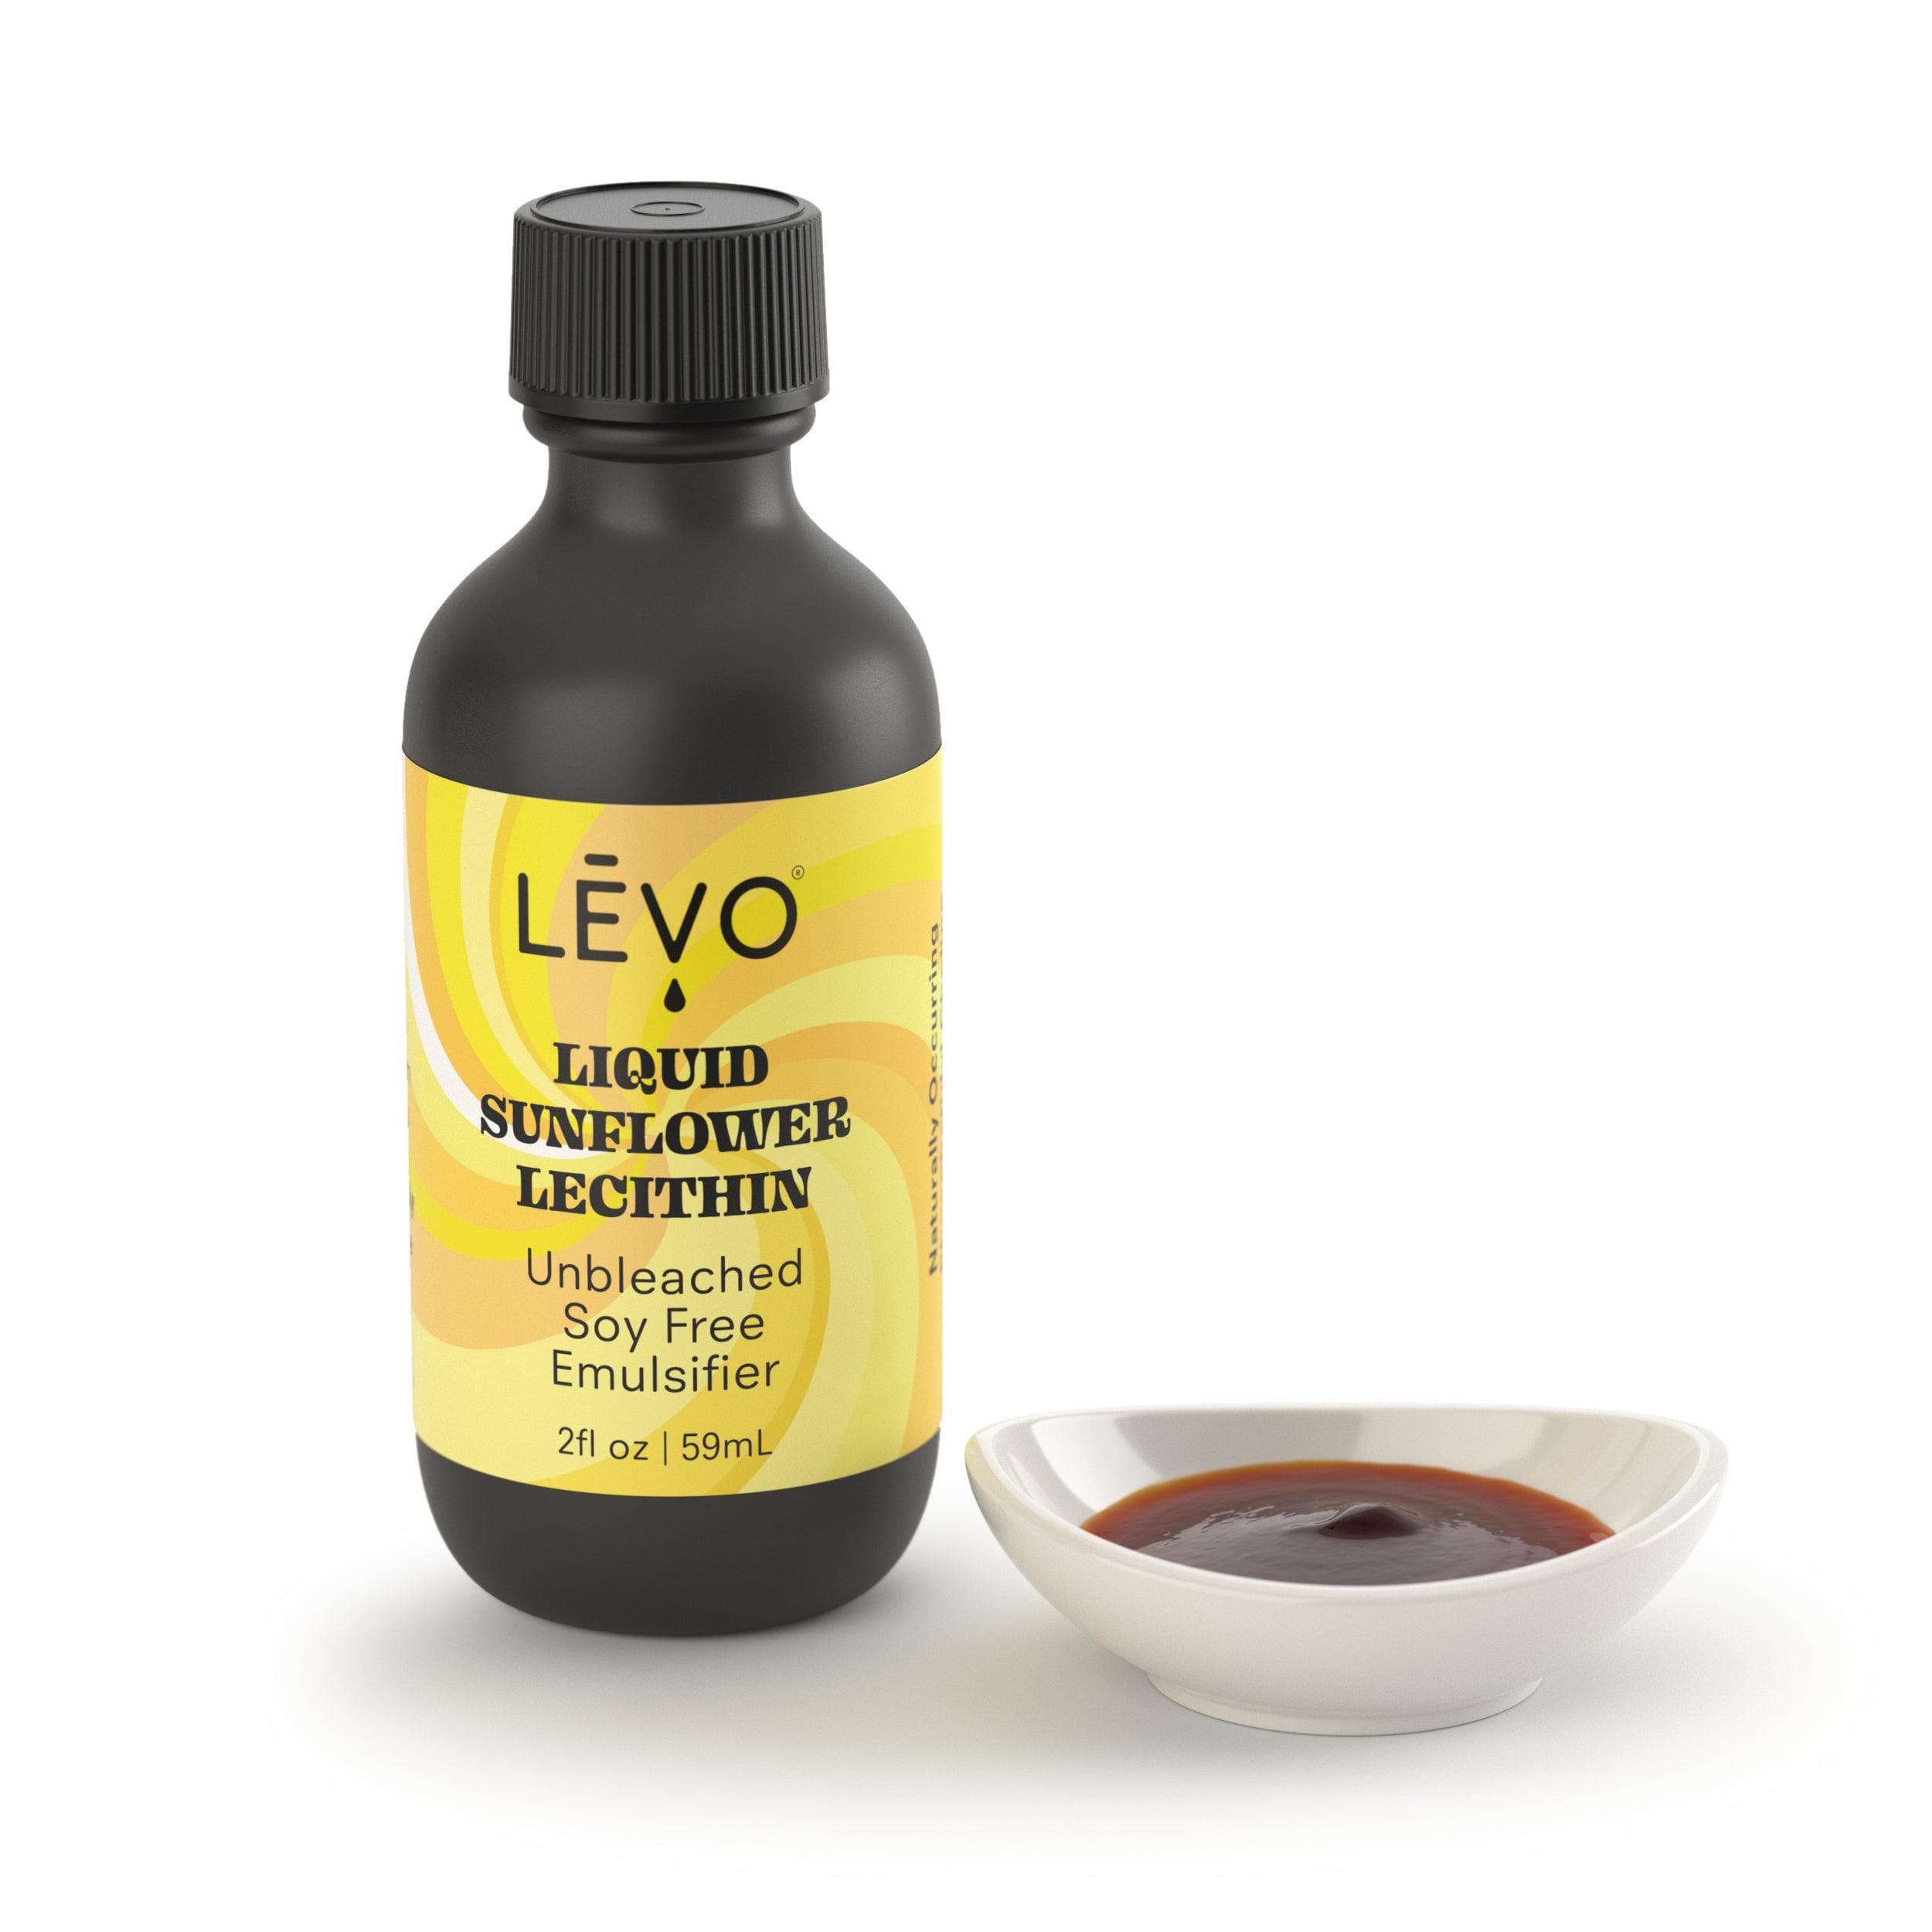 LEVO liquid sunflower lecithin 2oz bottle. Effortlessly create flavorful gummy candies with the Gummy Edibles Making Kit and Gummy Candy Mixer.